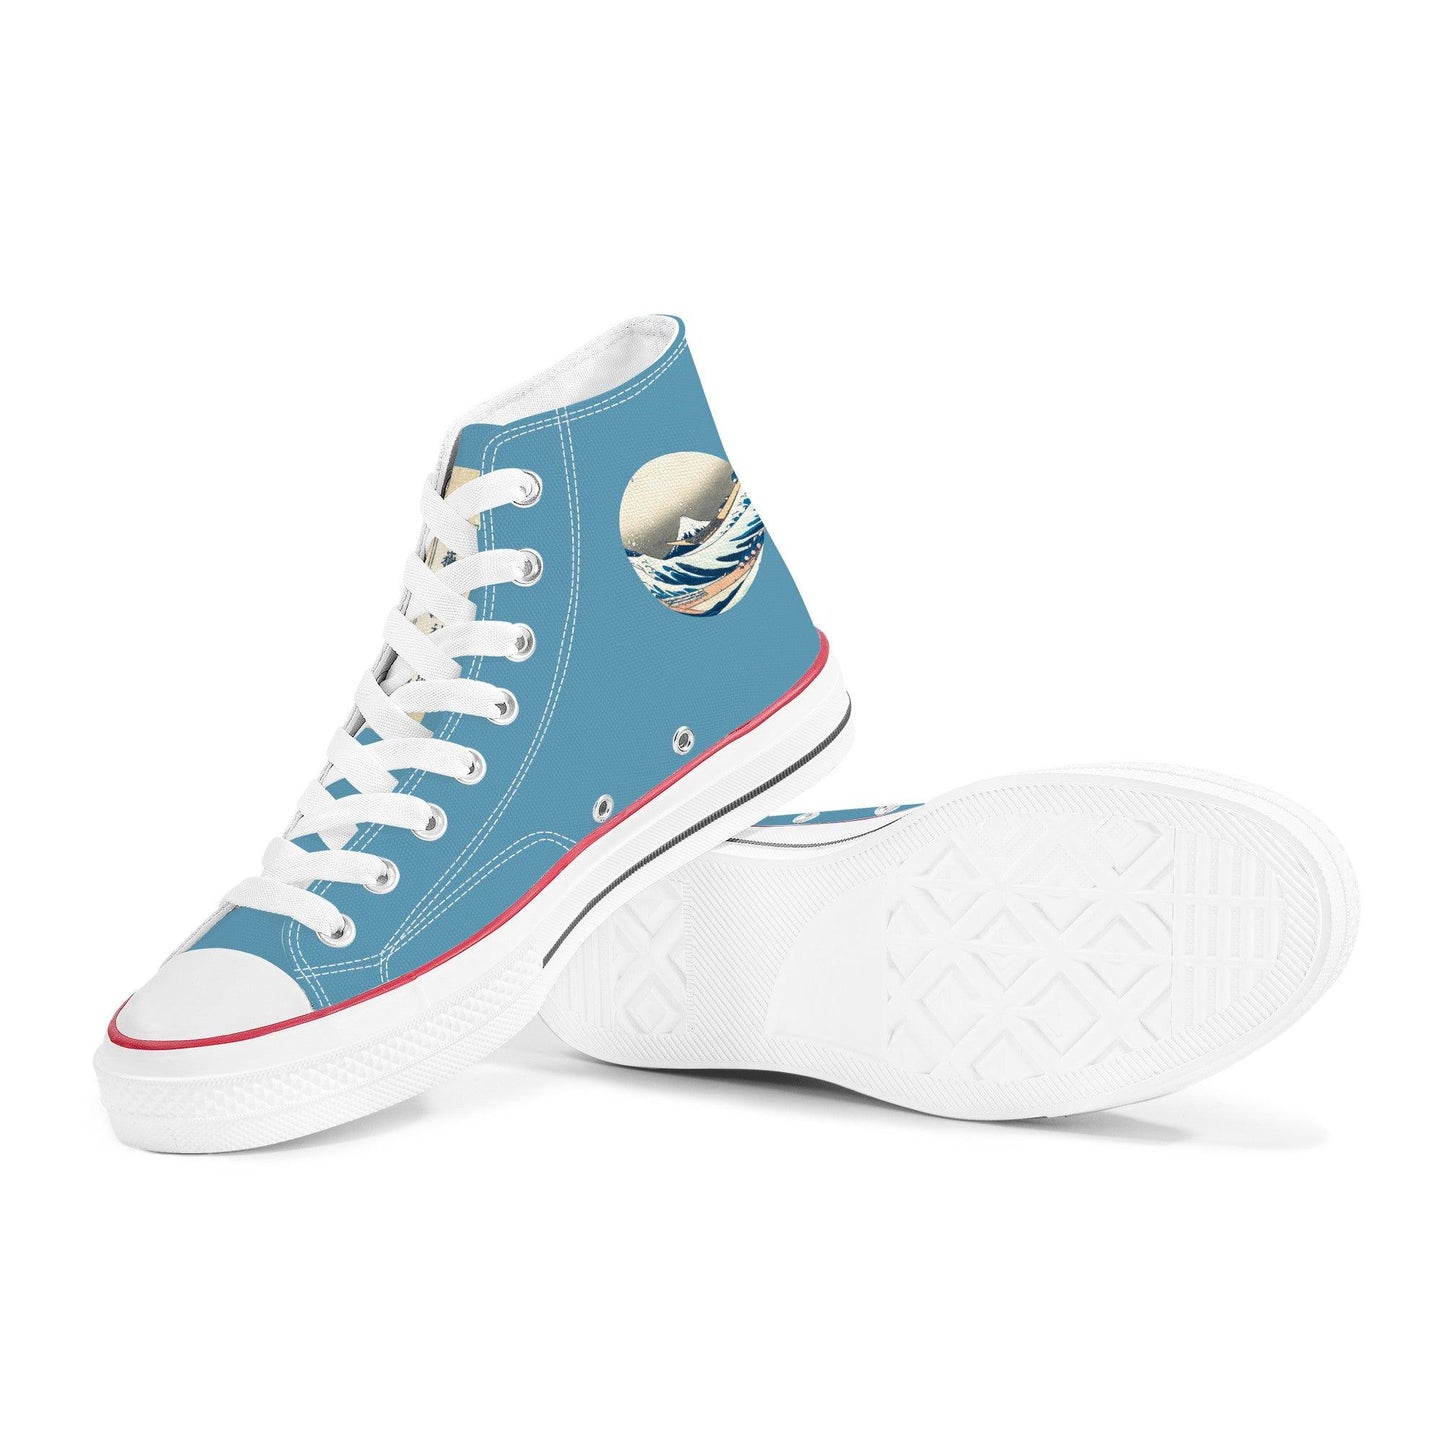 The Great Wave High Top Blue Canvas Shoes - Kaito Japan Design 